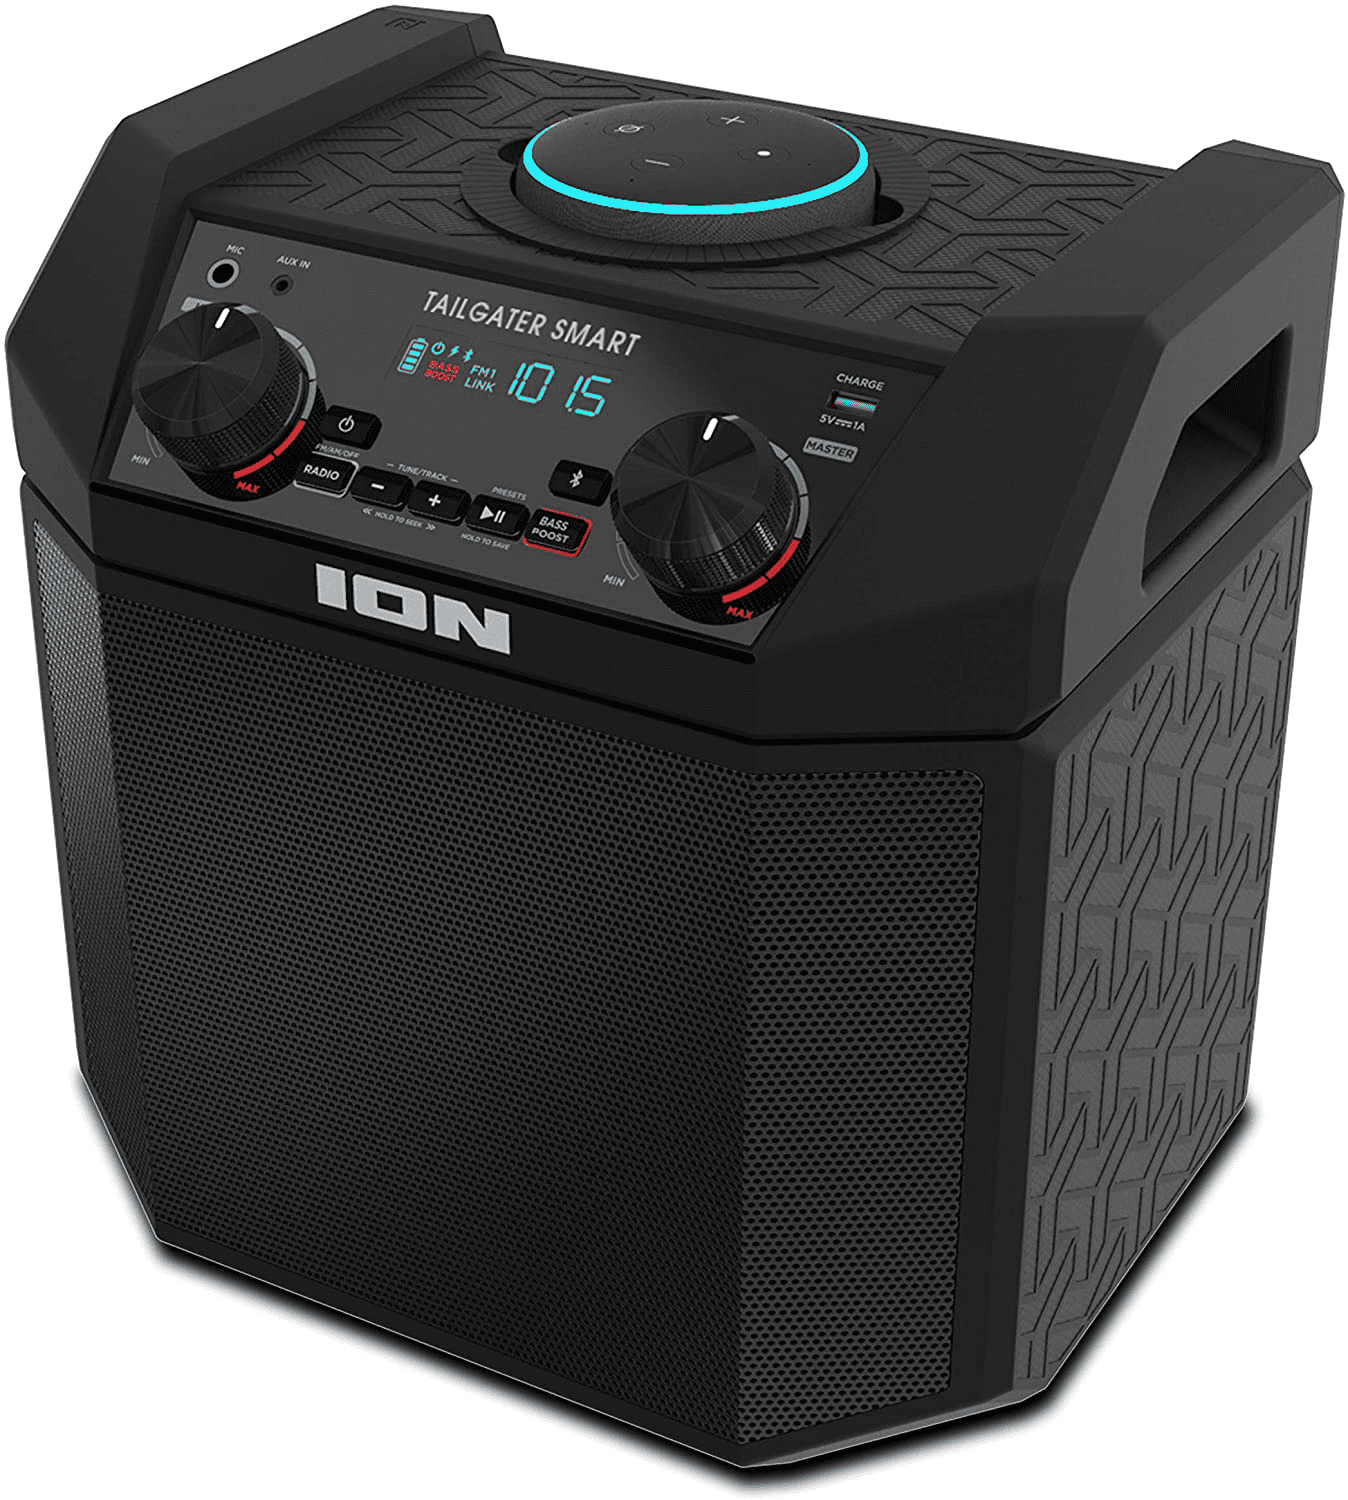 25W Portable Speaker AM/FM Radio，with ECHO/Rich Bass/Treble， USB Charging For Smartphones & Tablets ACETGY Battery Powered with Bluetooth Audio Block Rocker Plus Microphone & Cable